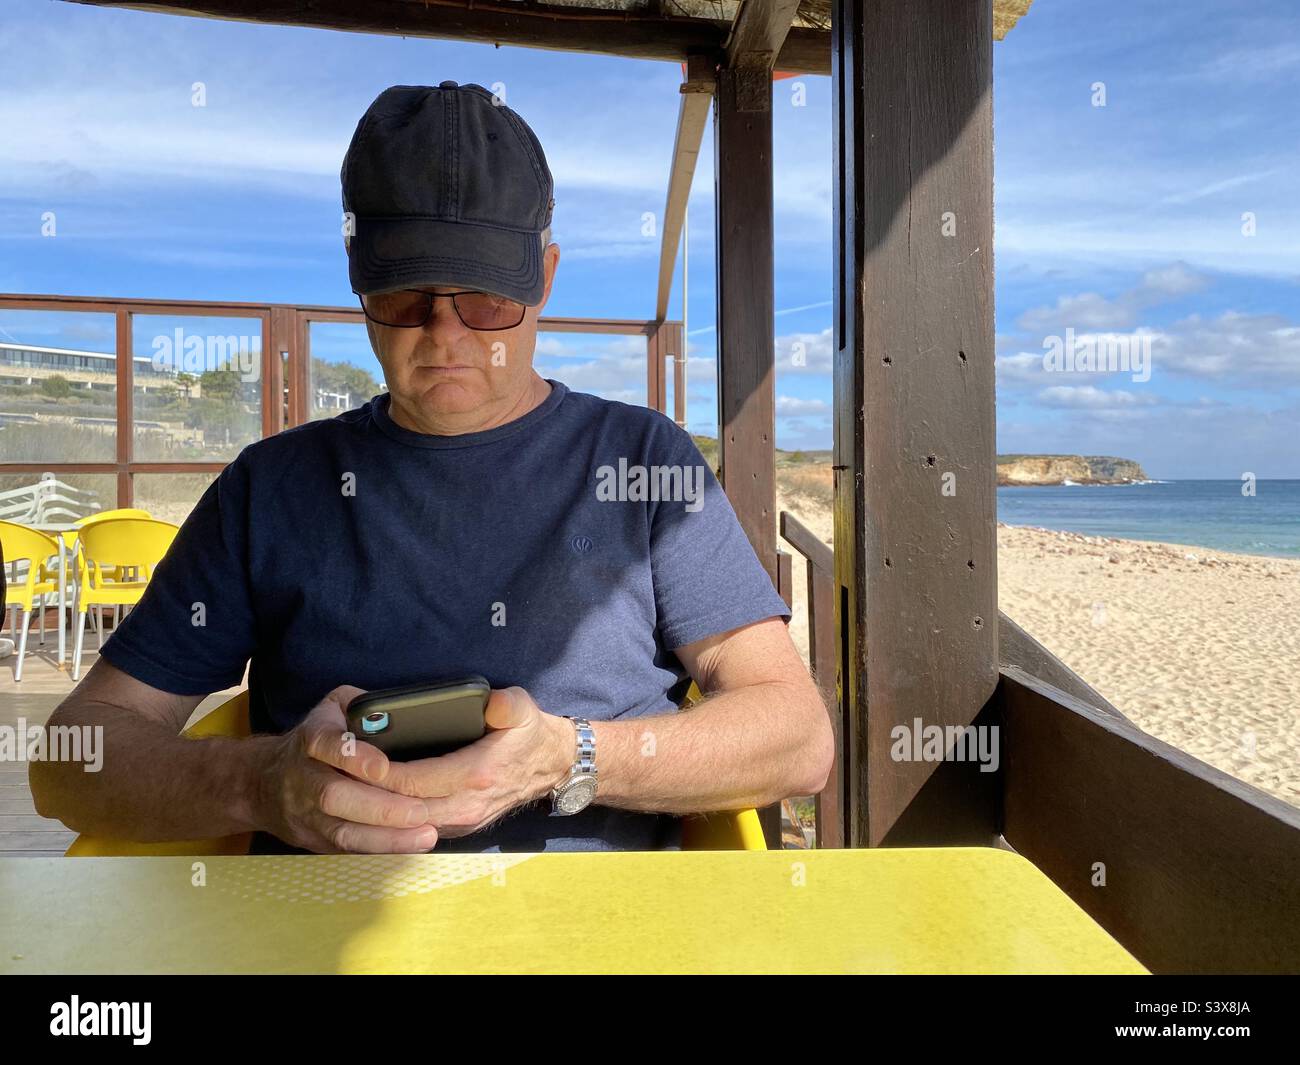 Remote working, man sitting in a beach cafe working on his mobile phone Stock Photo